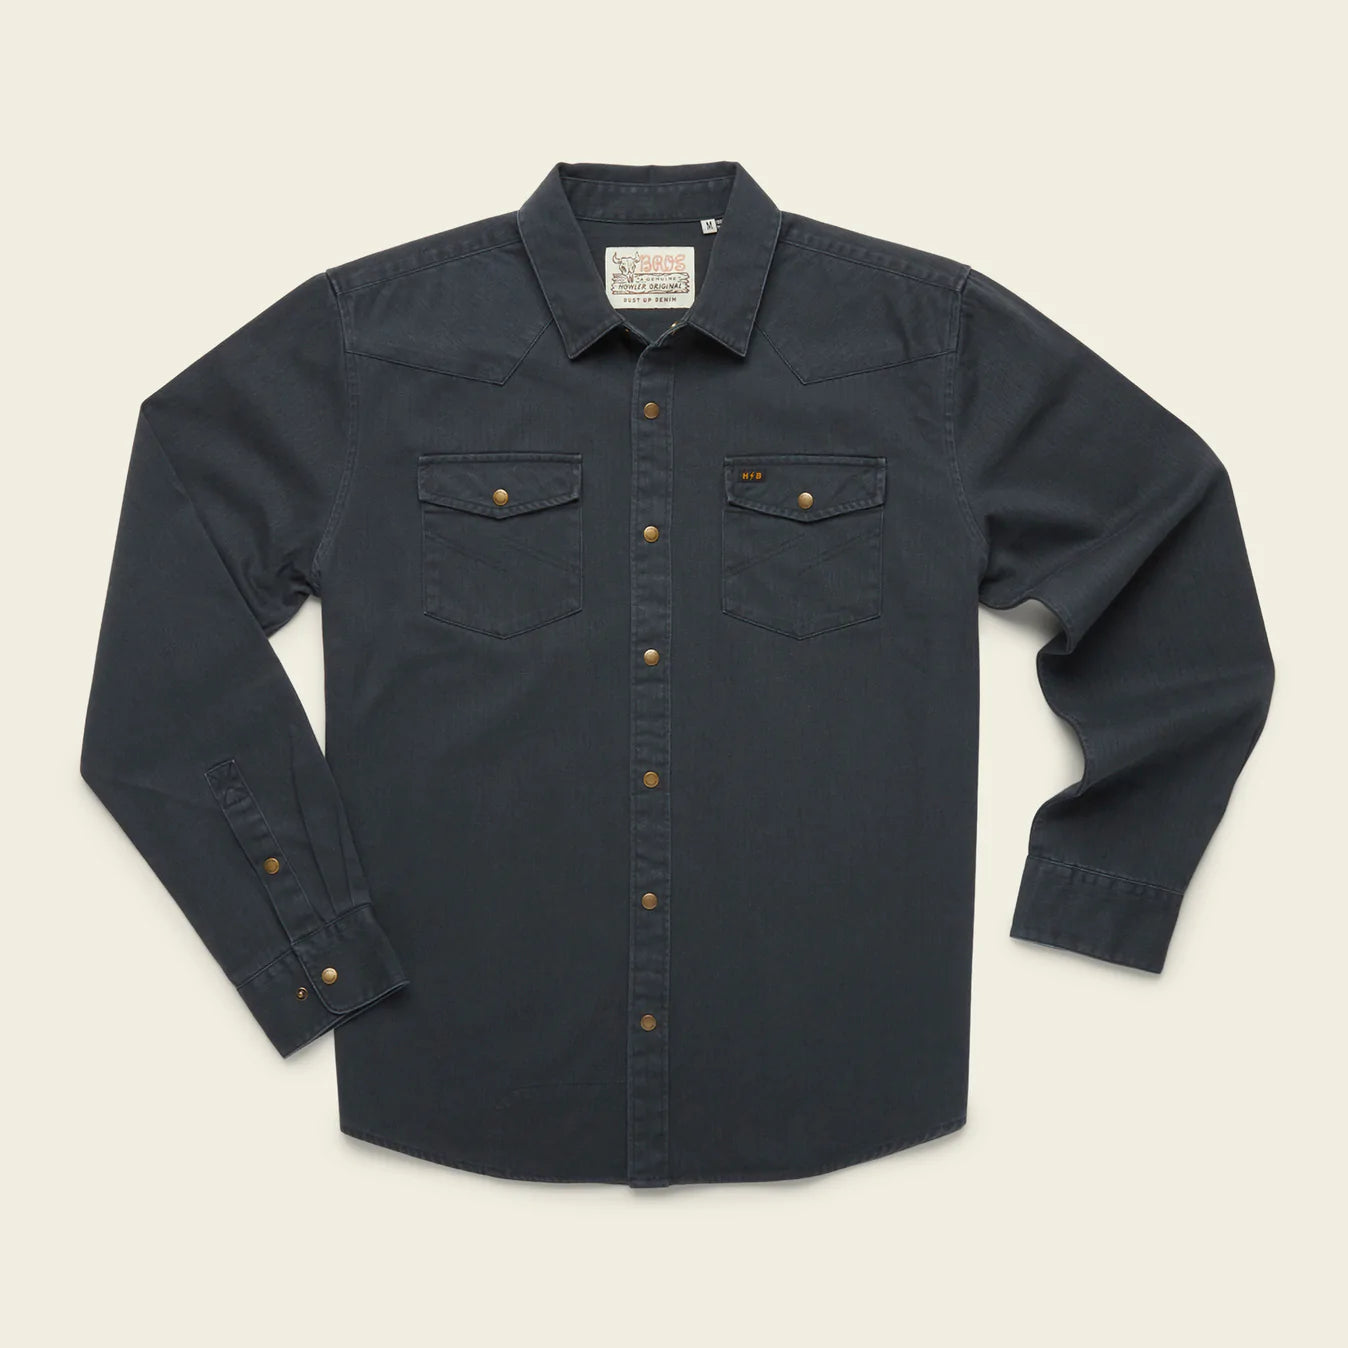 Howler Brothers Sawdust Work Shirt SALE Now 40% Off!